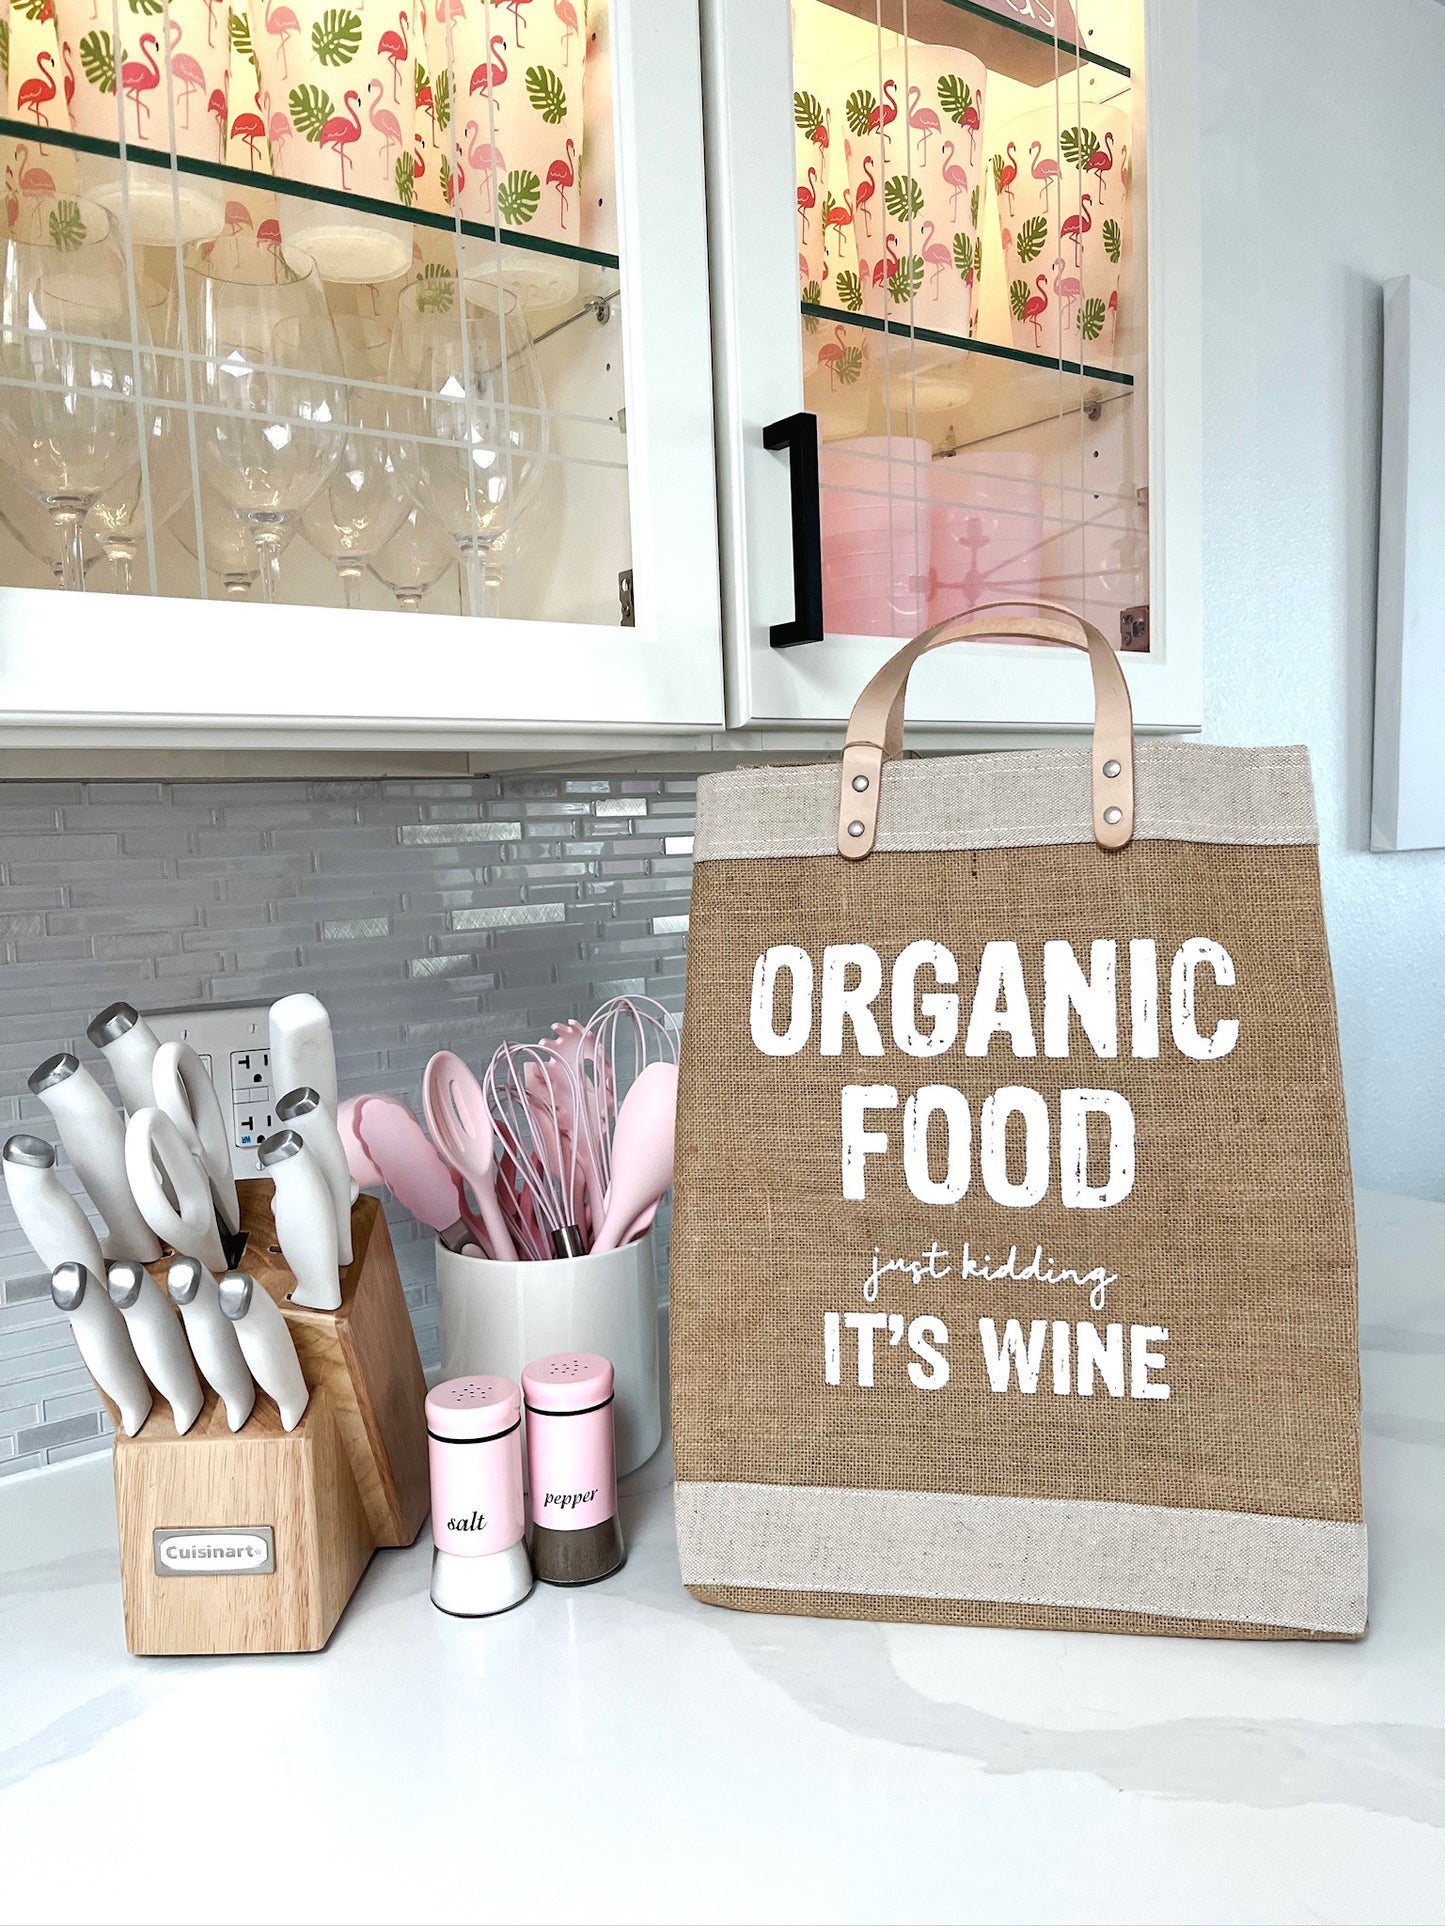 Just Kidding It's Wine Grocery Tote